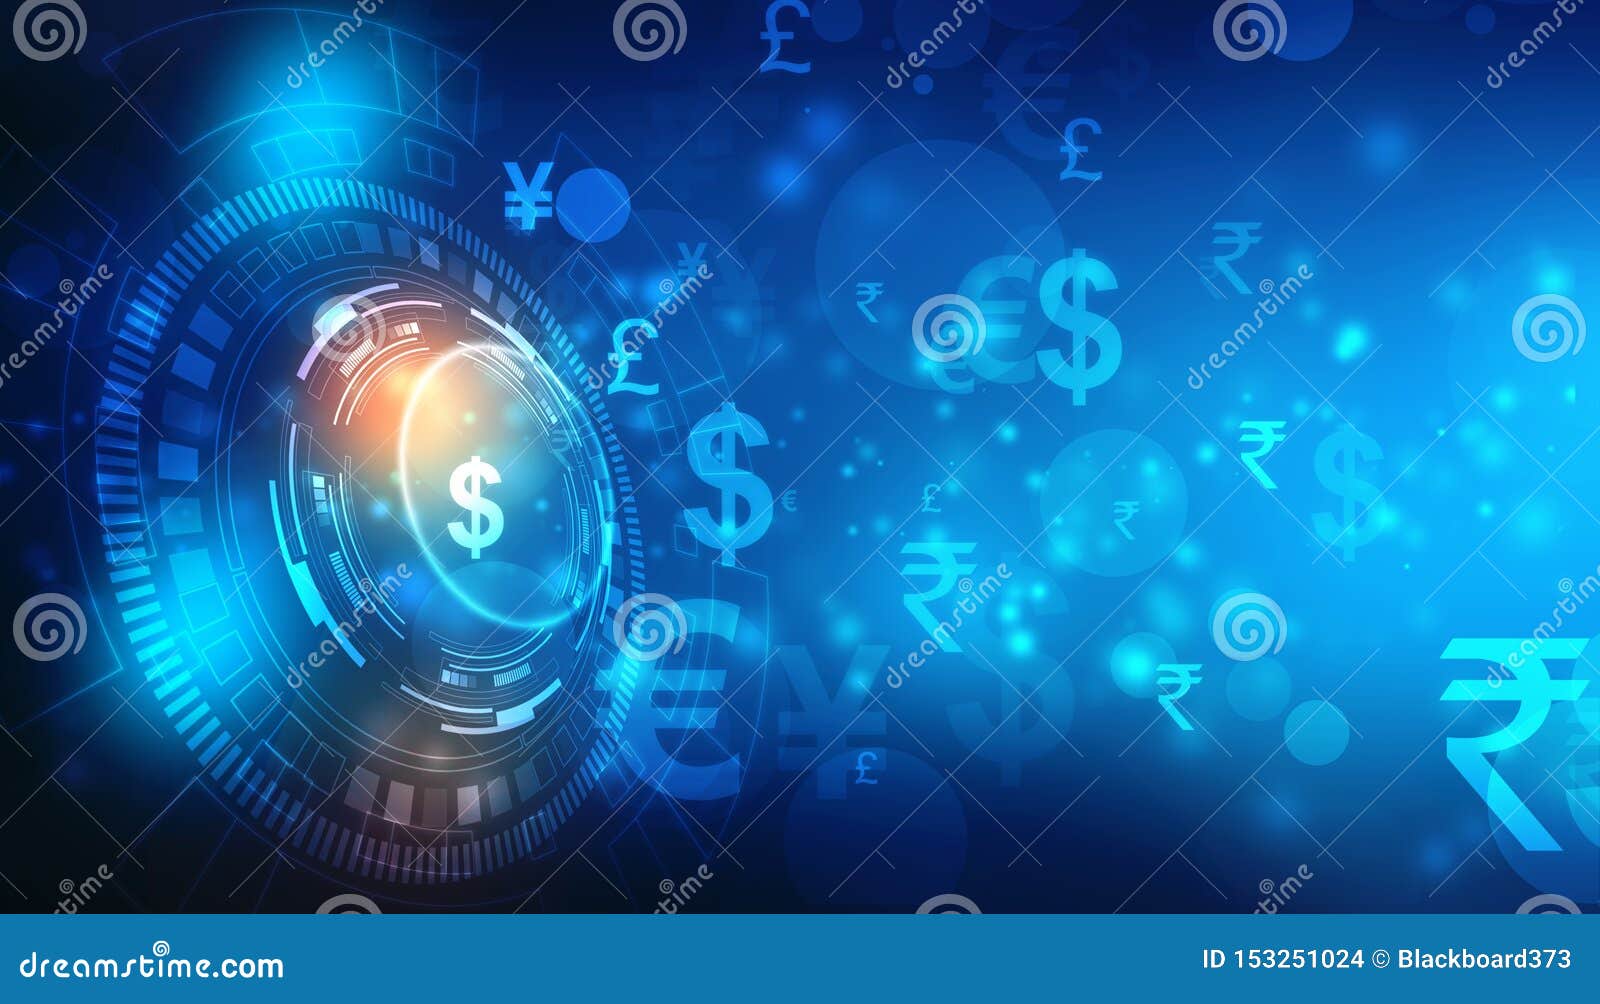 global currency on technology background, money transfer, stock market concept